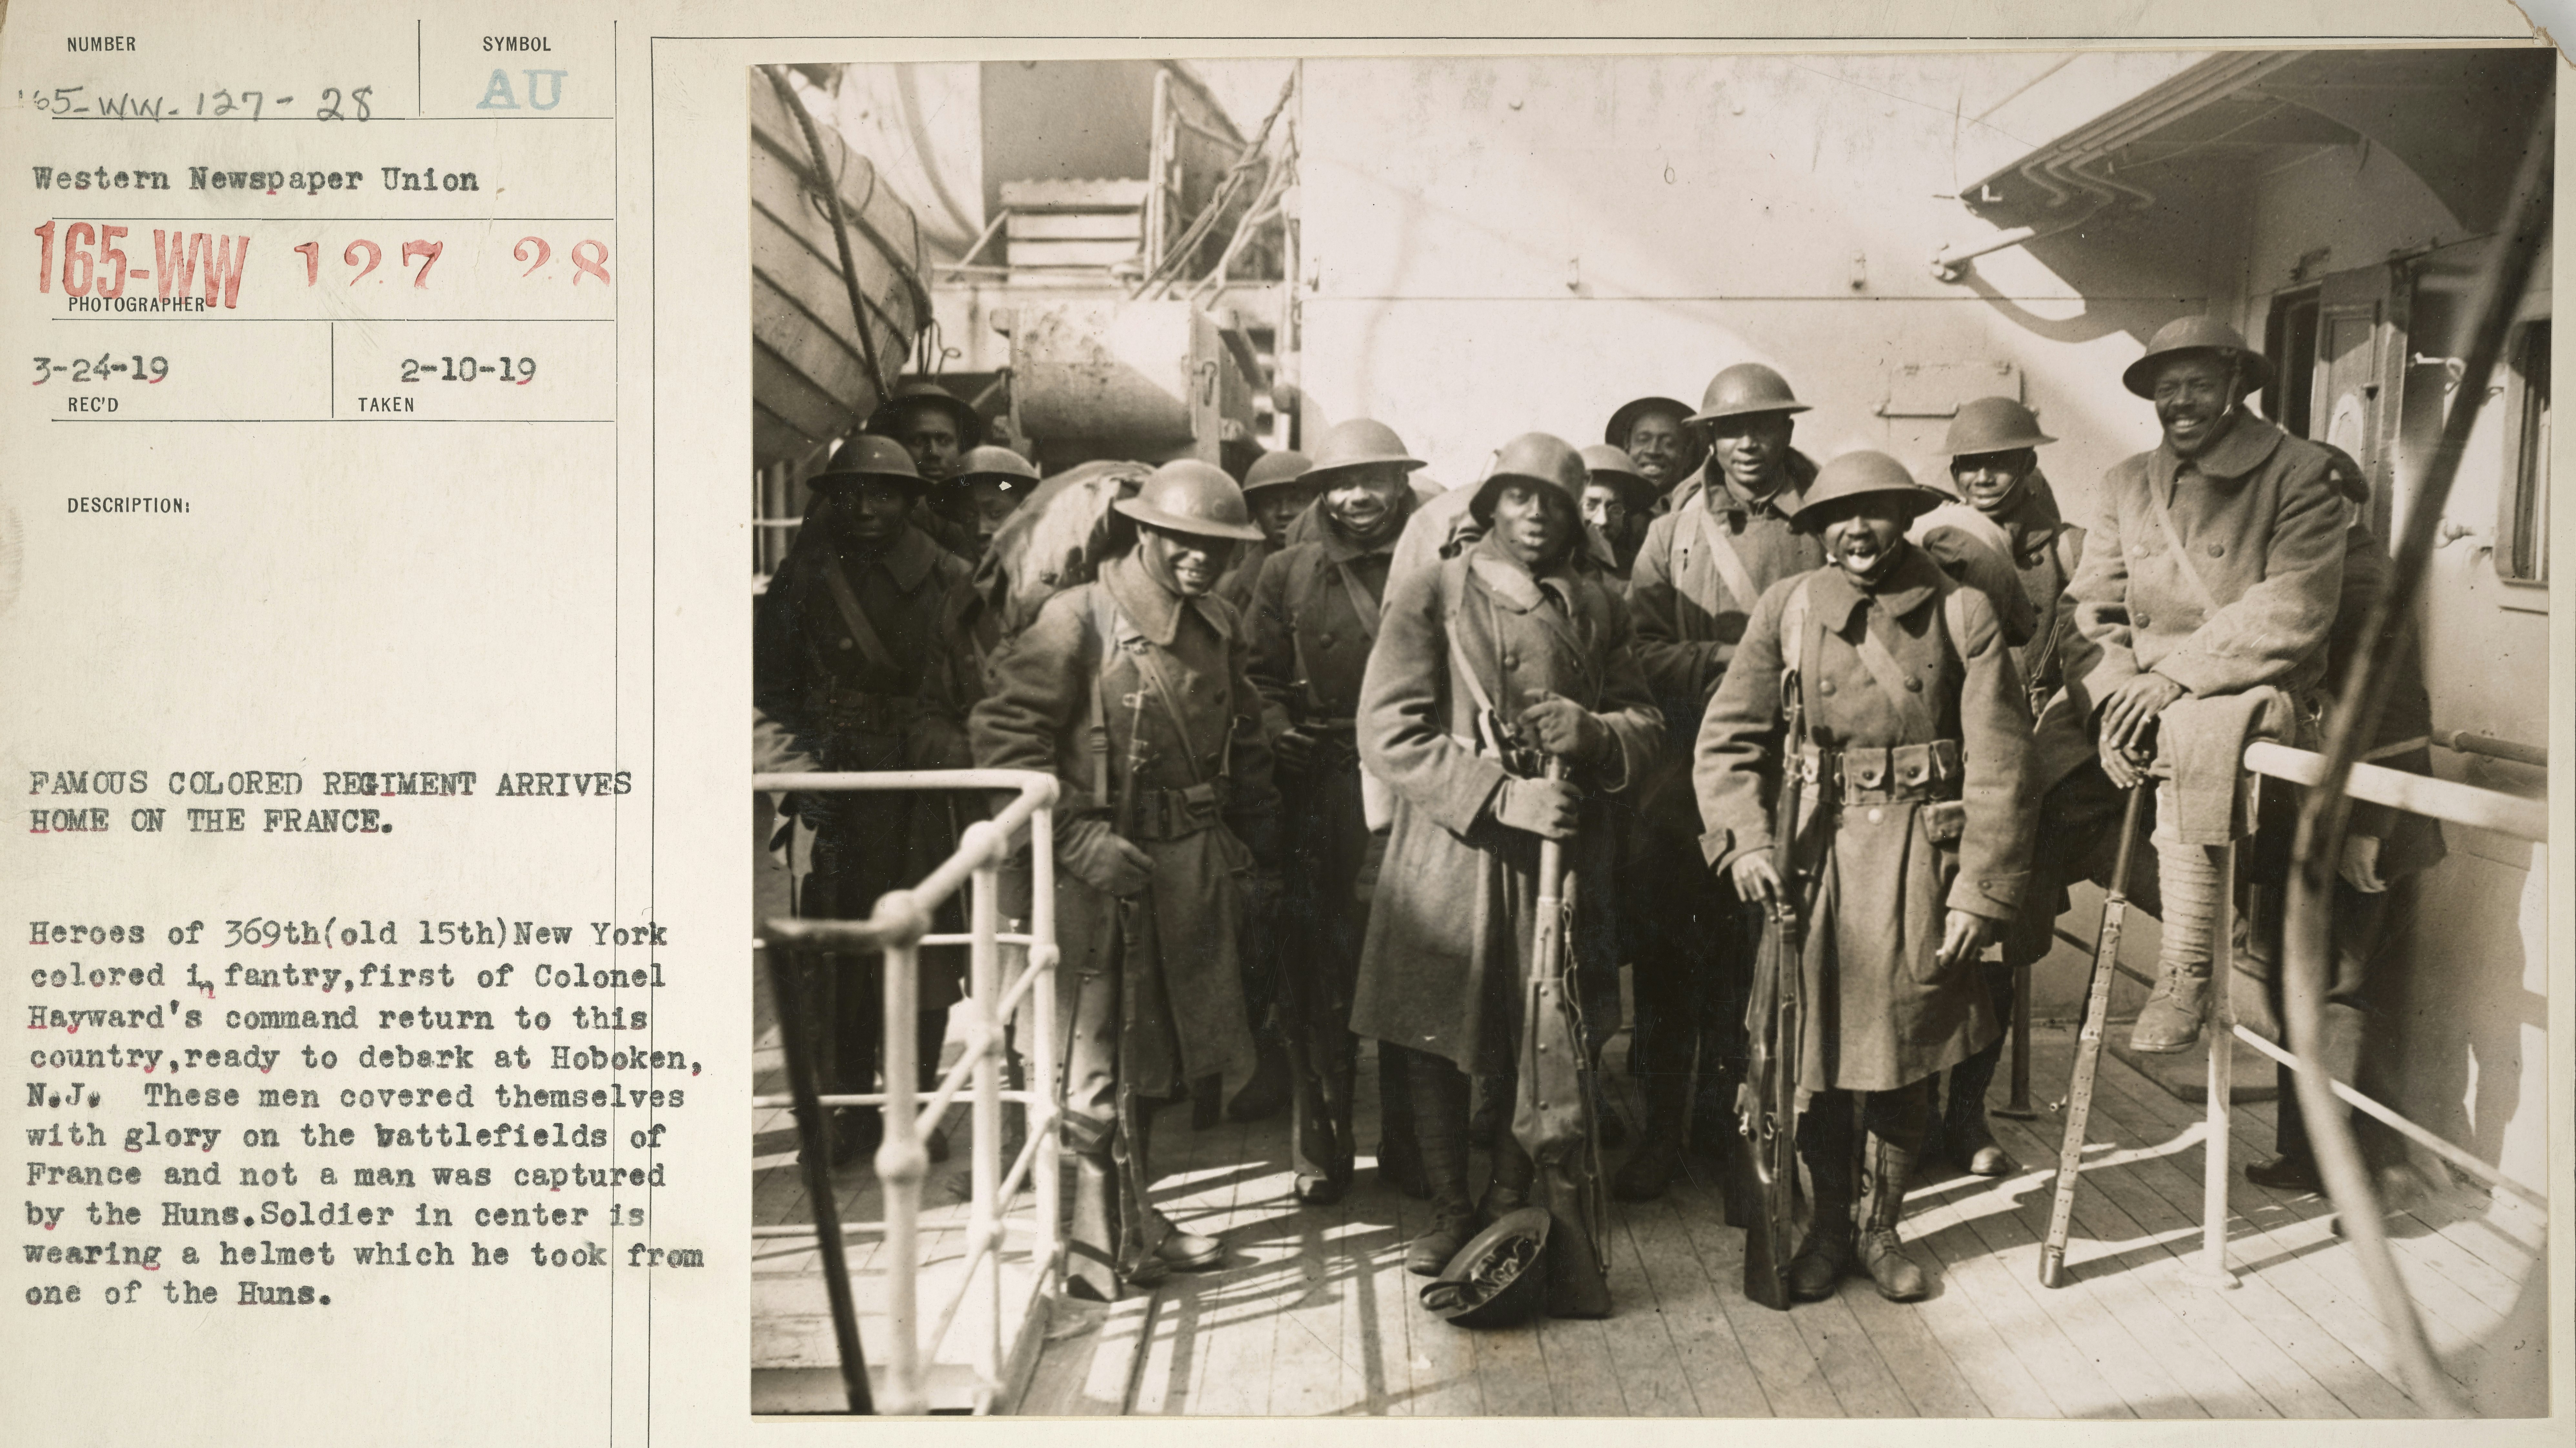 A historical photo shows a group of Black US soldiers. The original caption reads: Famous Colored Regiment Arrives Home on the France. Heroes of the 369th (old 15th) New York colored infantry, first of Colonel Hayward's command return to this country, ready to debark at Hoboken, N.J. These men covered themselves with glory on the battlefields of France and not a man was captured by the Huns. Soldier in center is wearing a helmet which he took from one of the Huns.